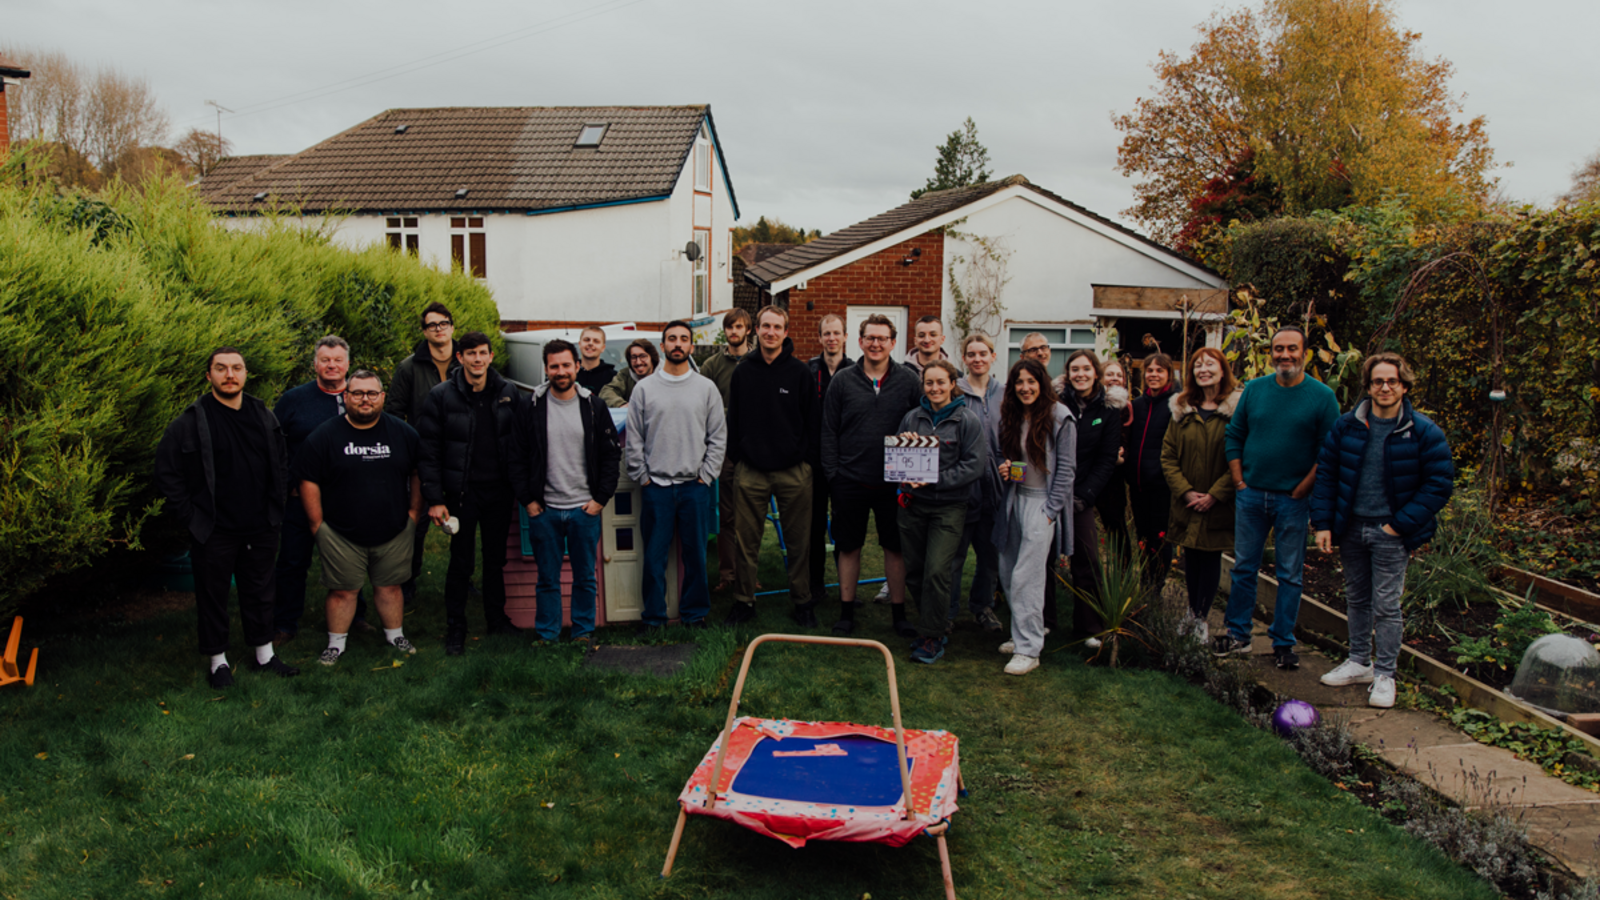 The crew working on the short film standing for a group photo in a back garden